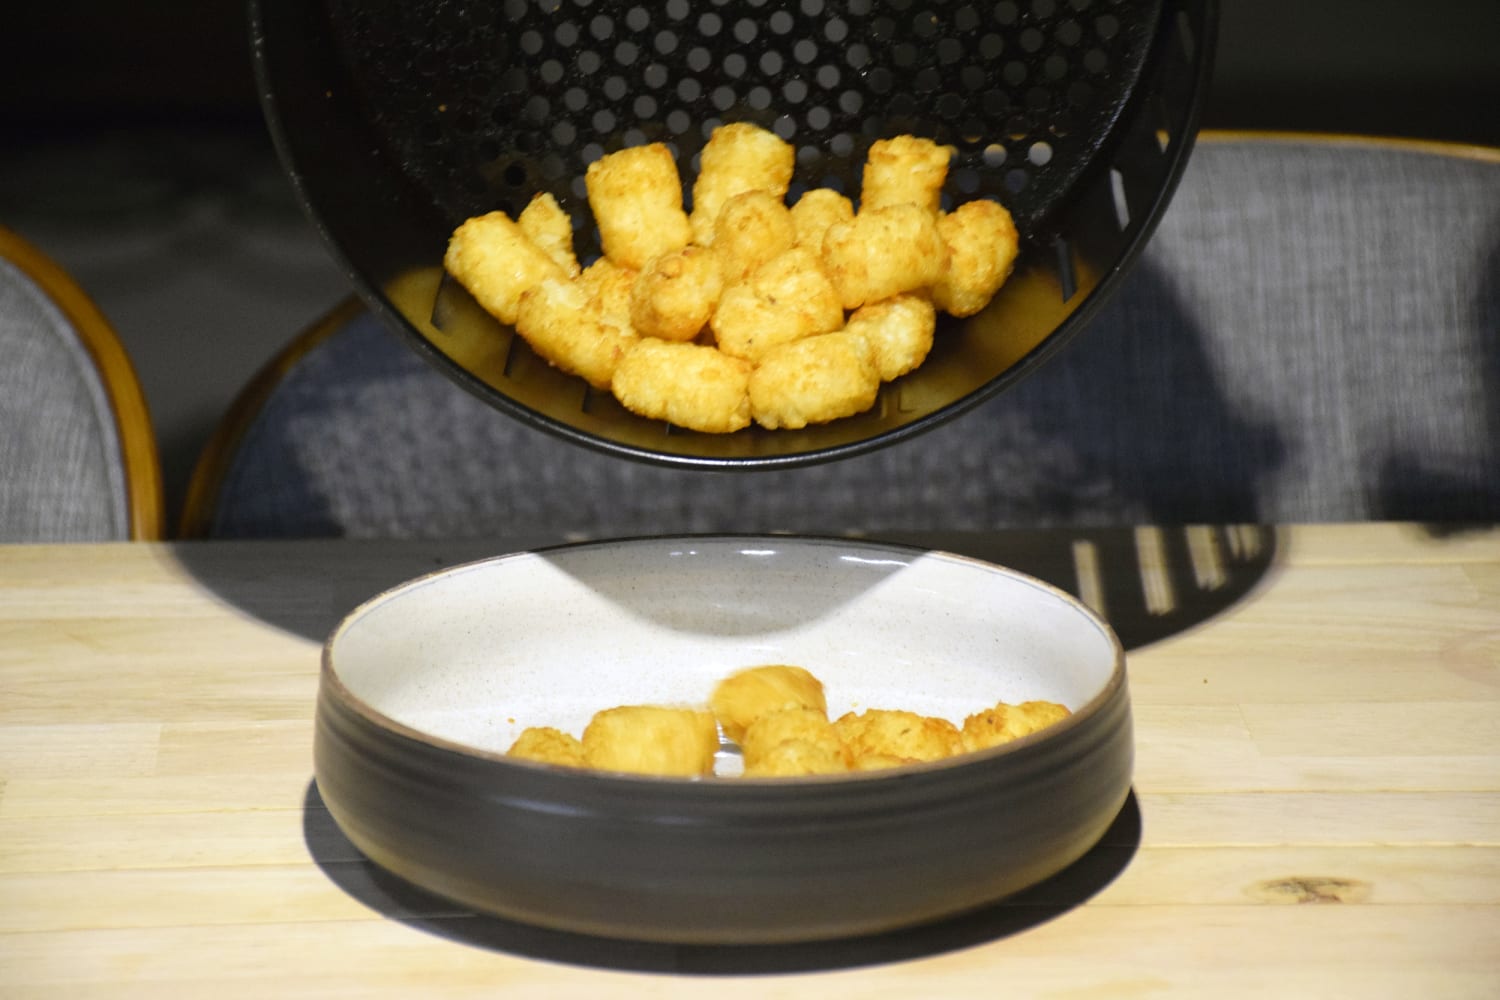 Tips on Using an Air Frying Oven